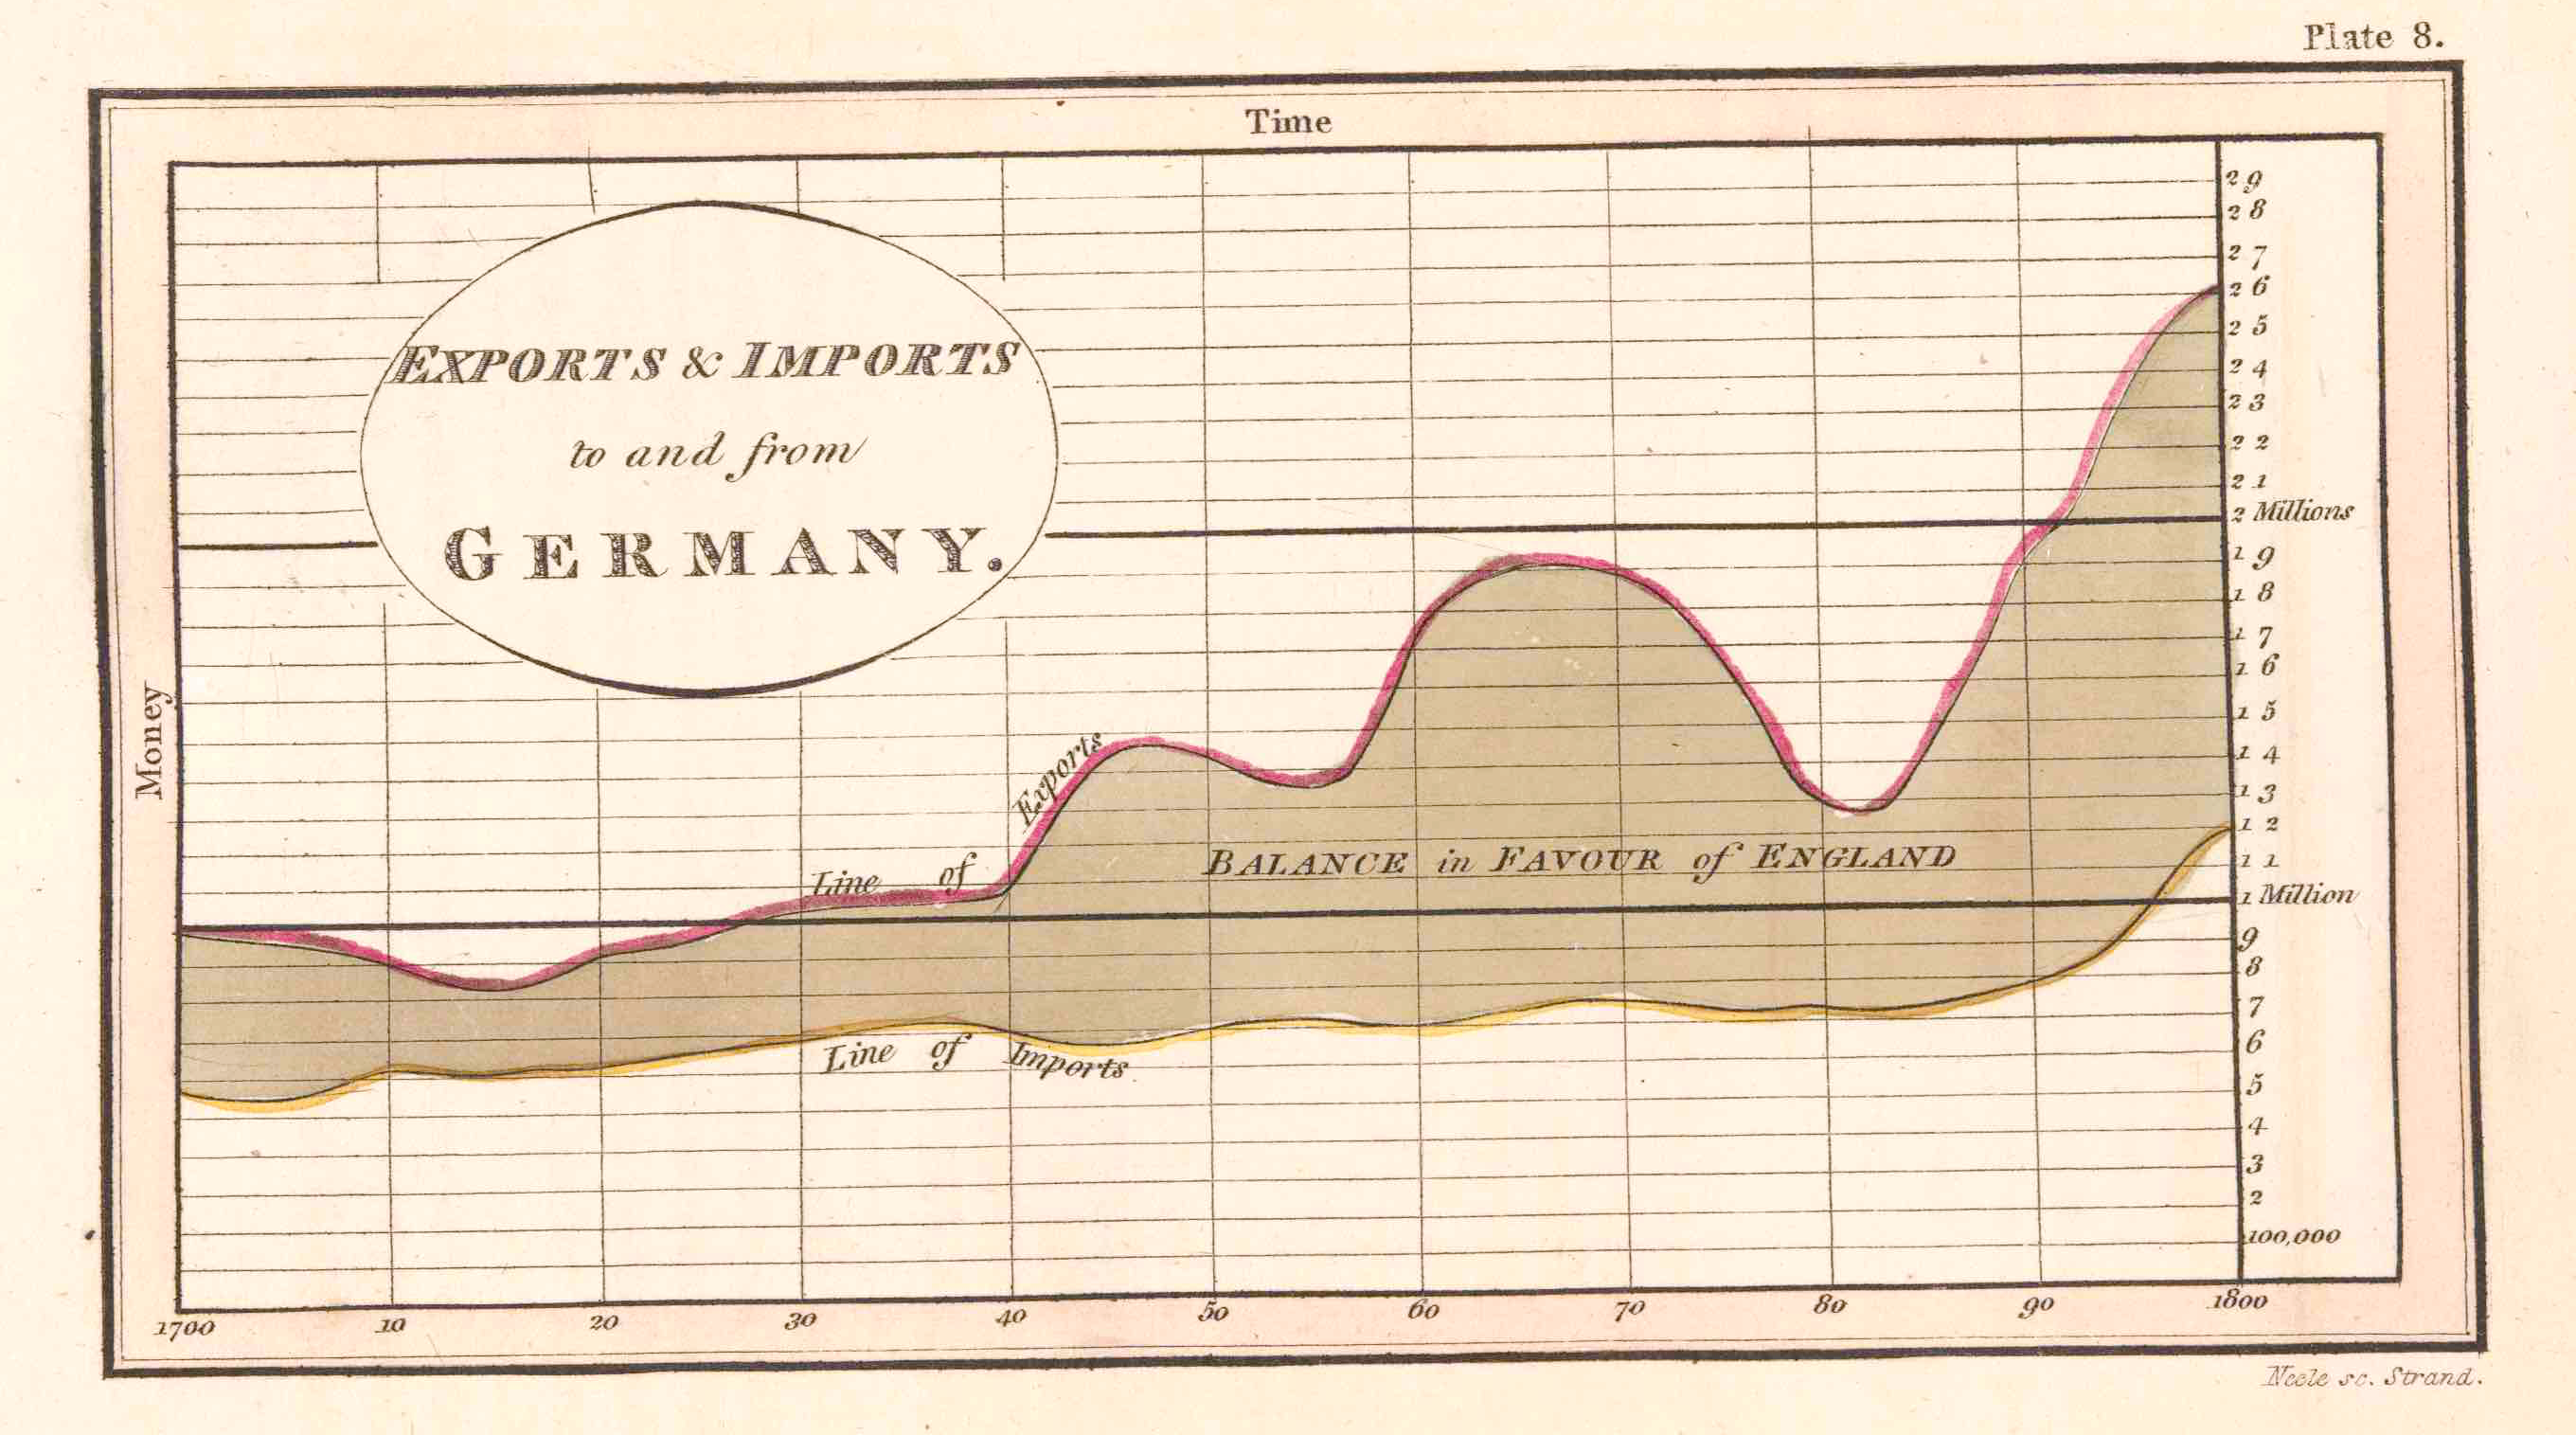 Exports and imports with Germany: A time-series line graph showing England’s im- ports from and exports to Germany over the entire eighteenth century.